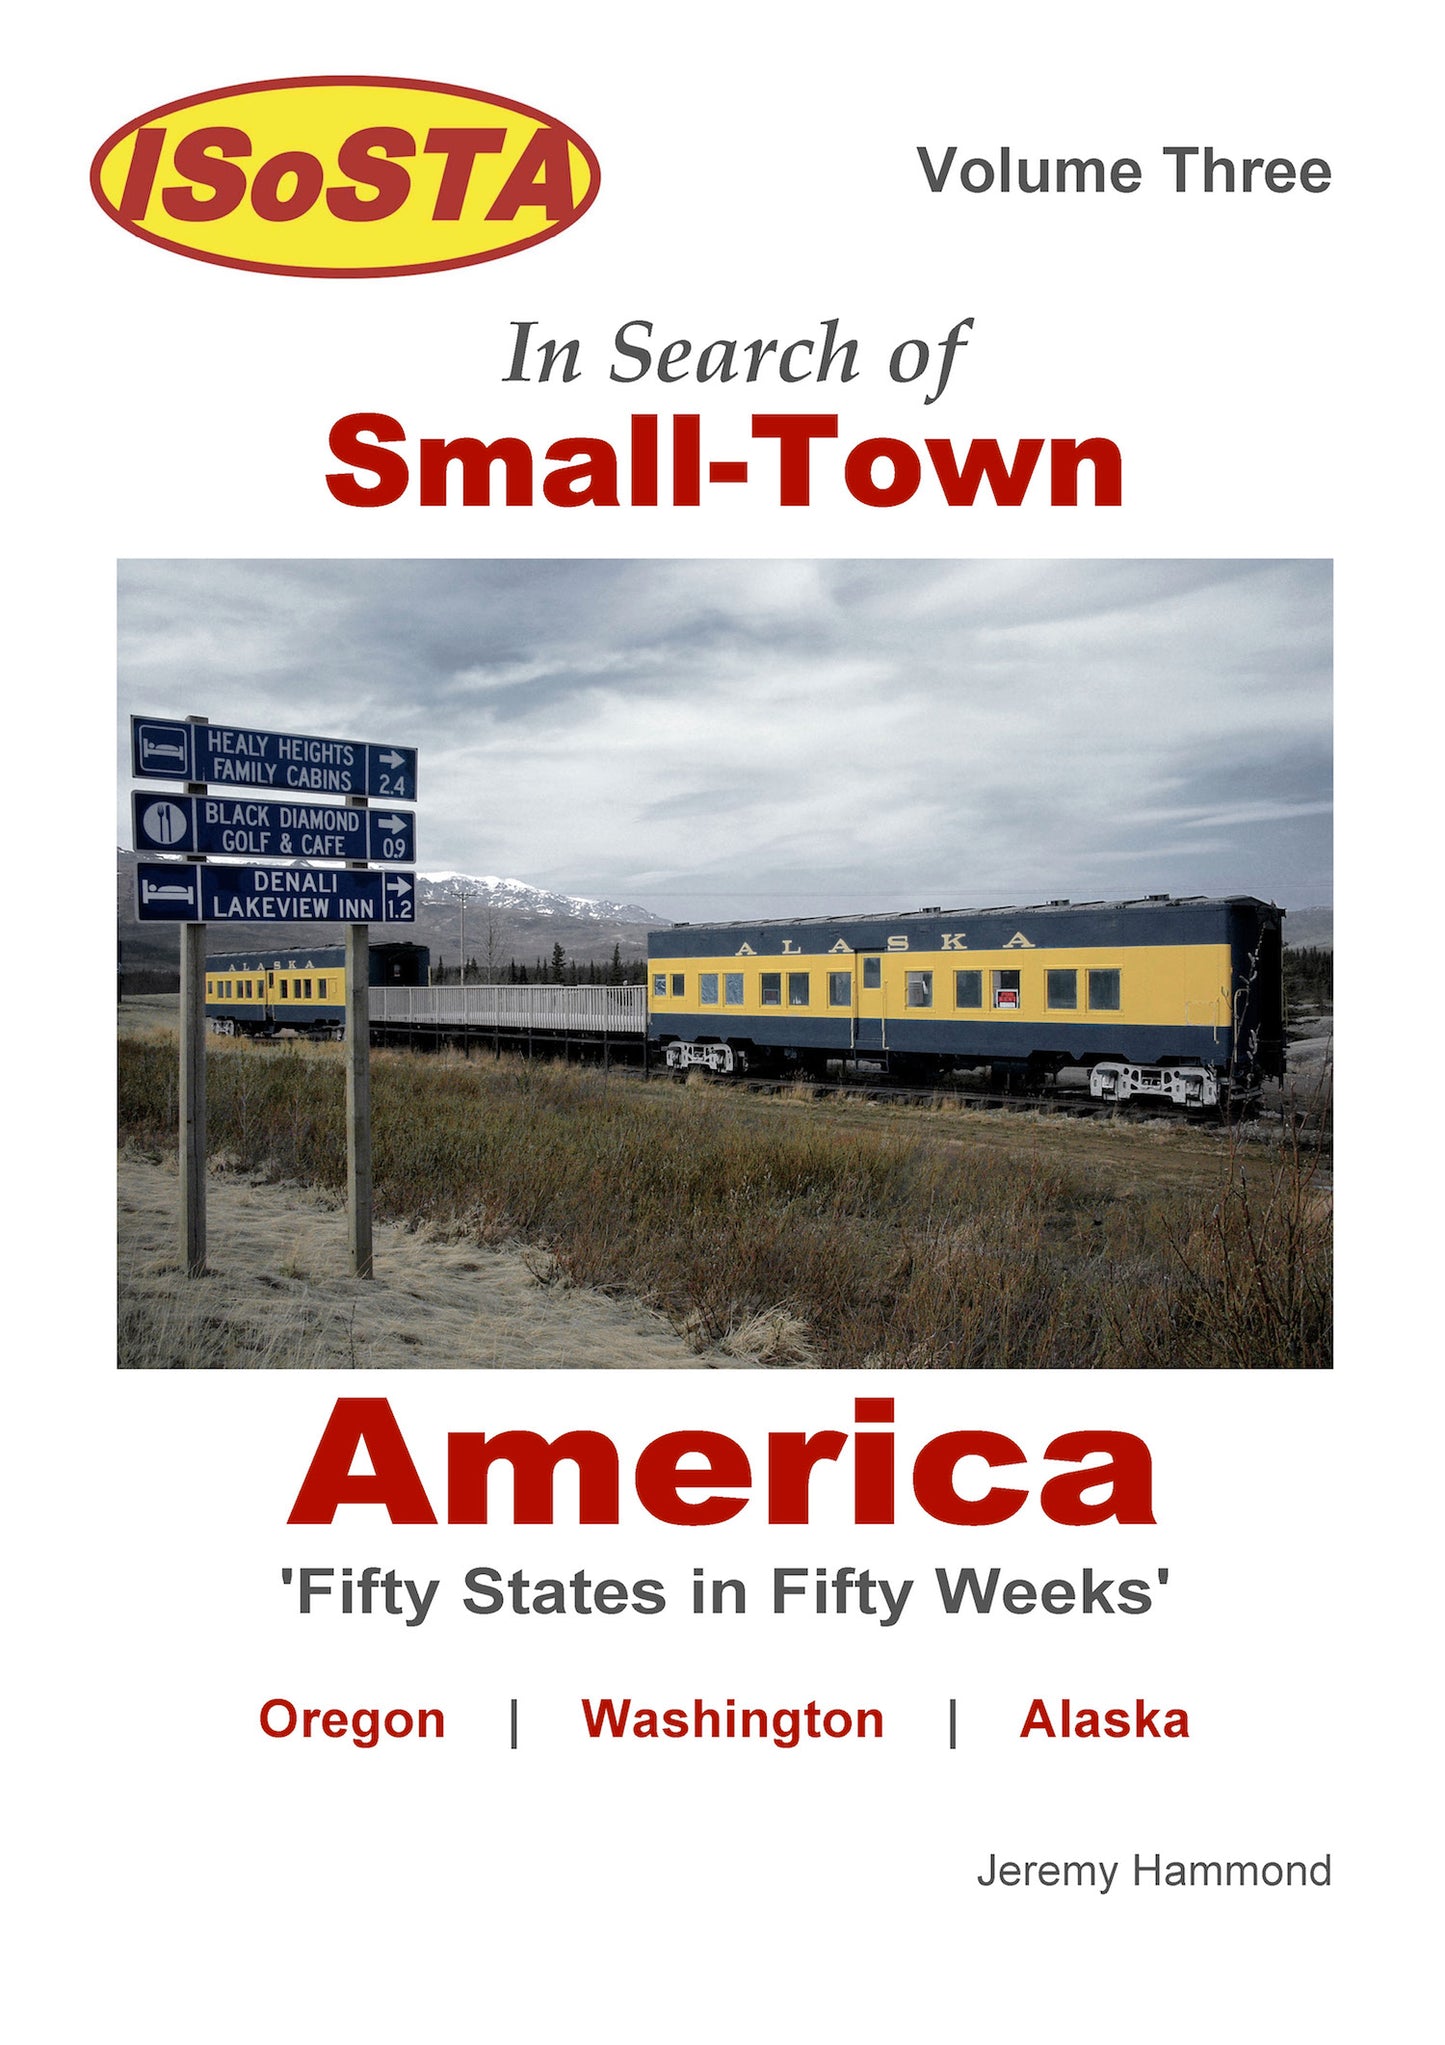 In Search of Small-Town America: Volume 3